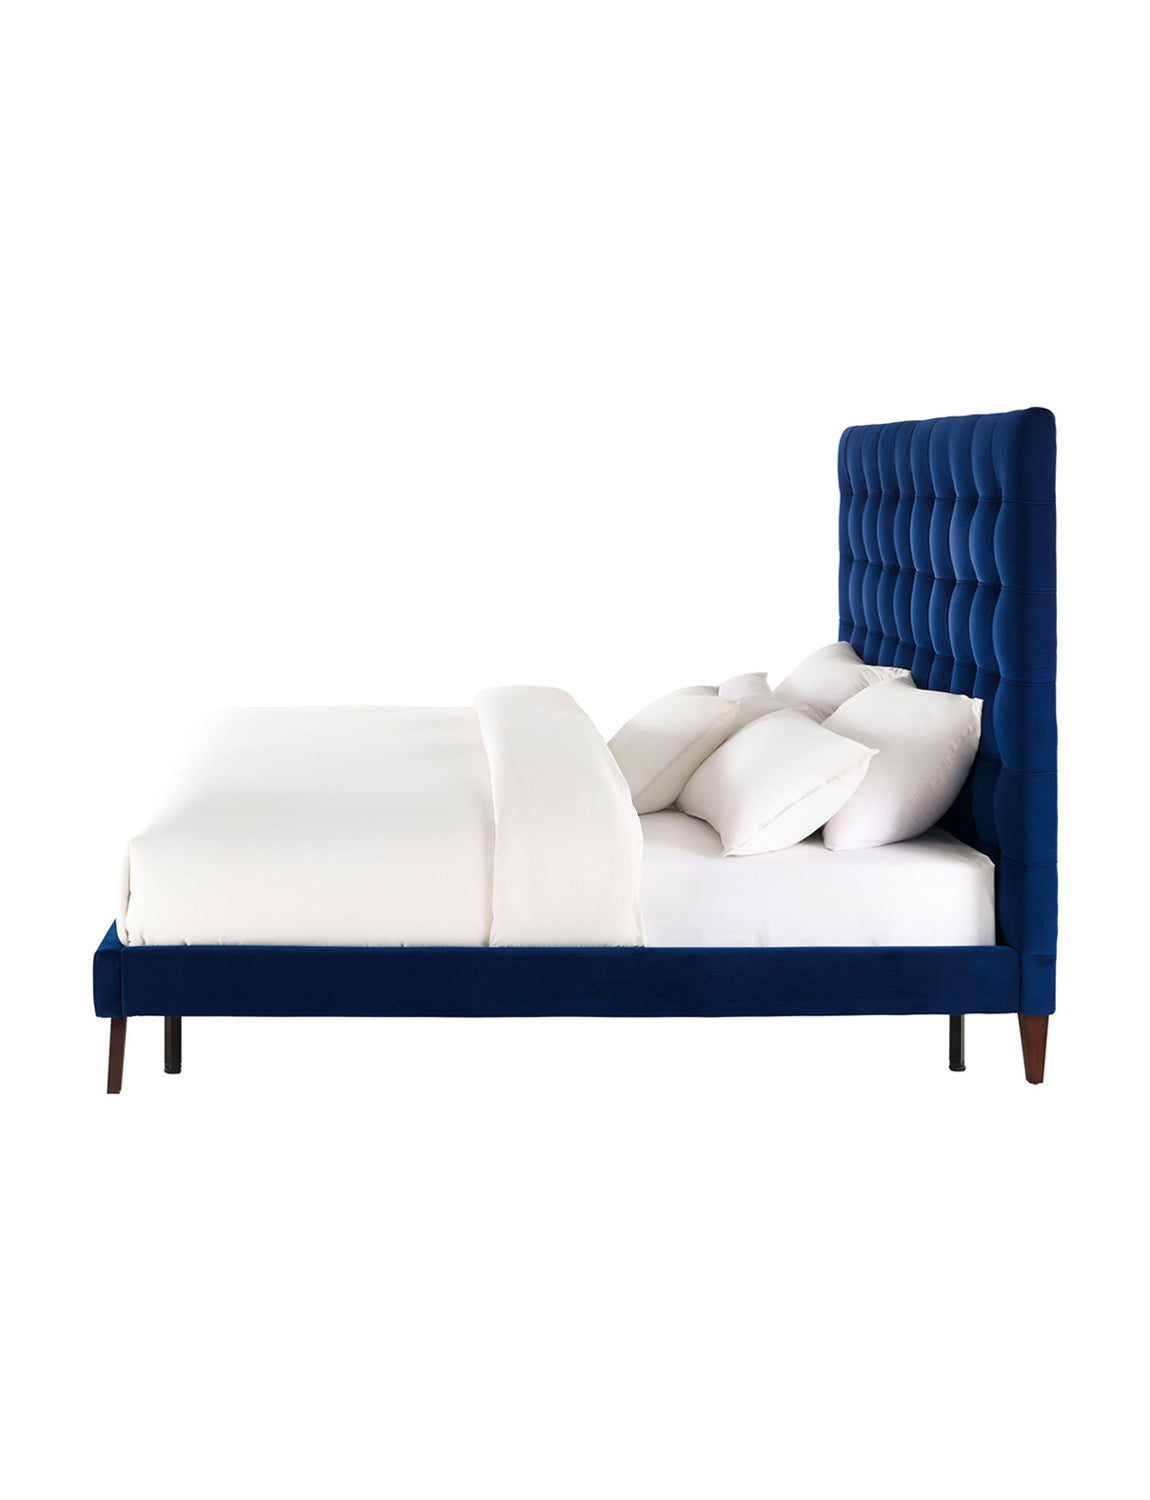 Ethan Bed, navy